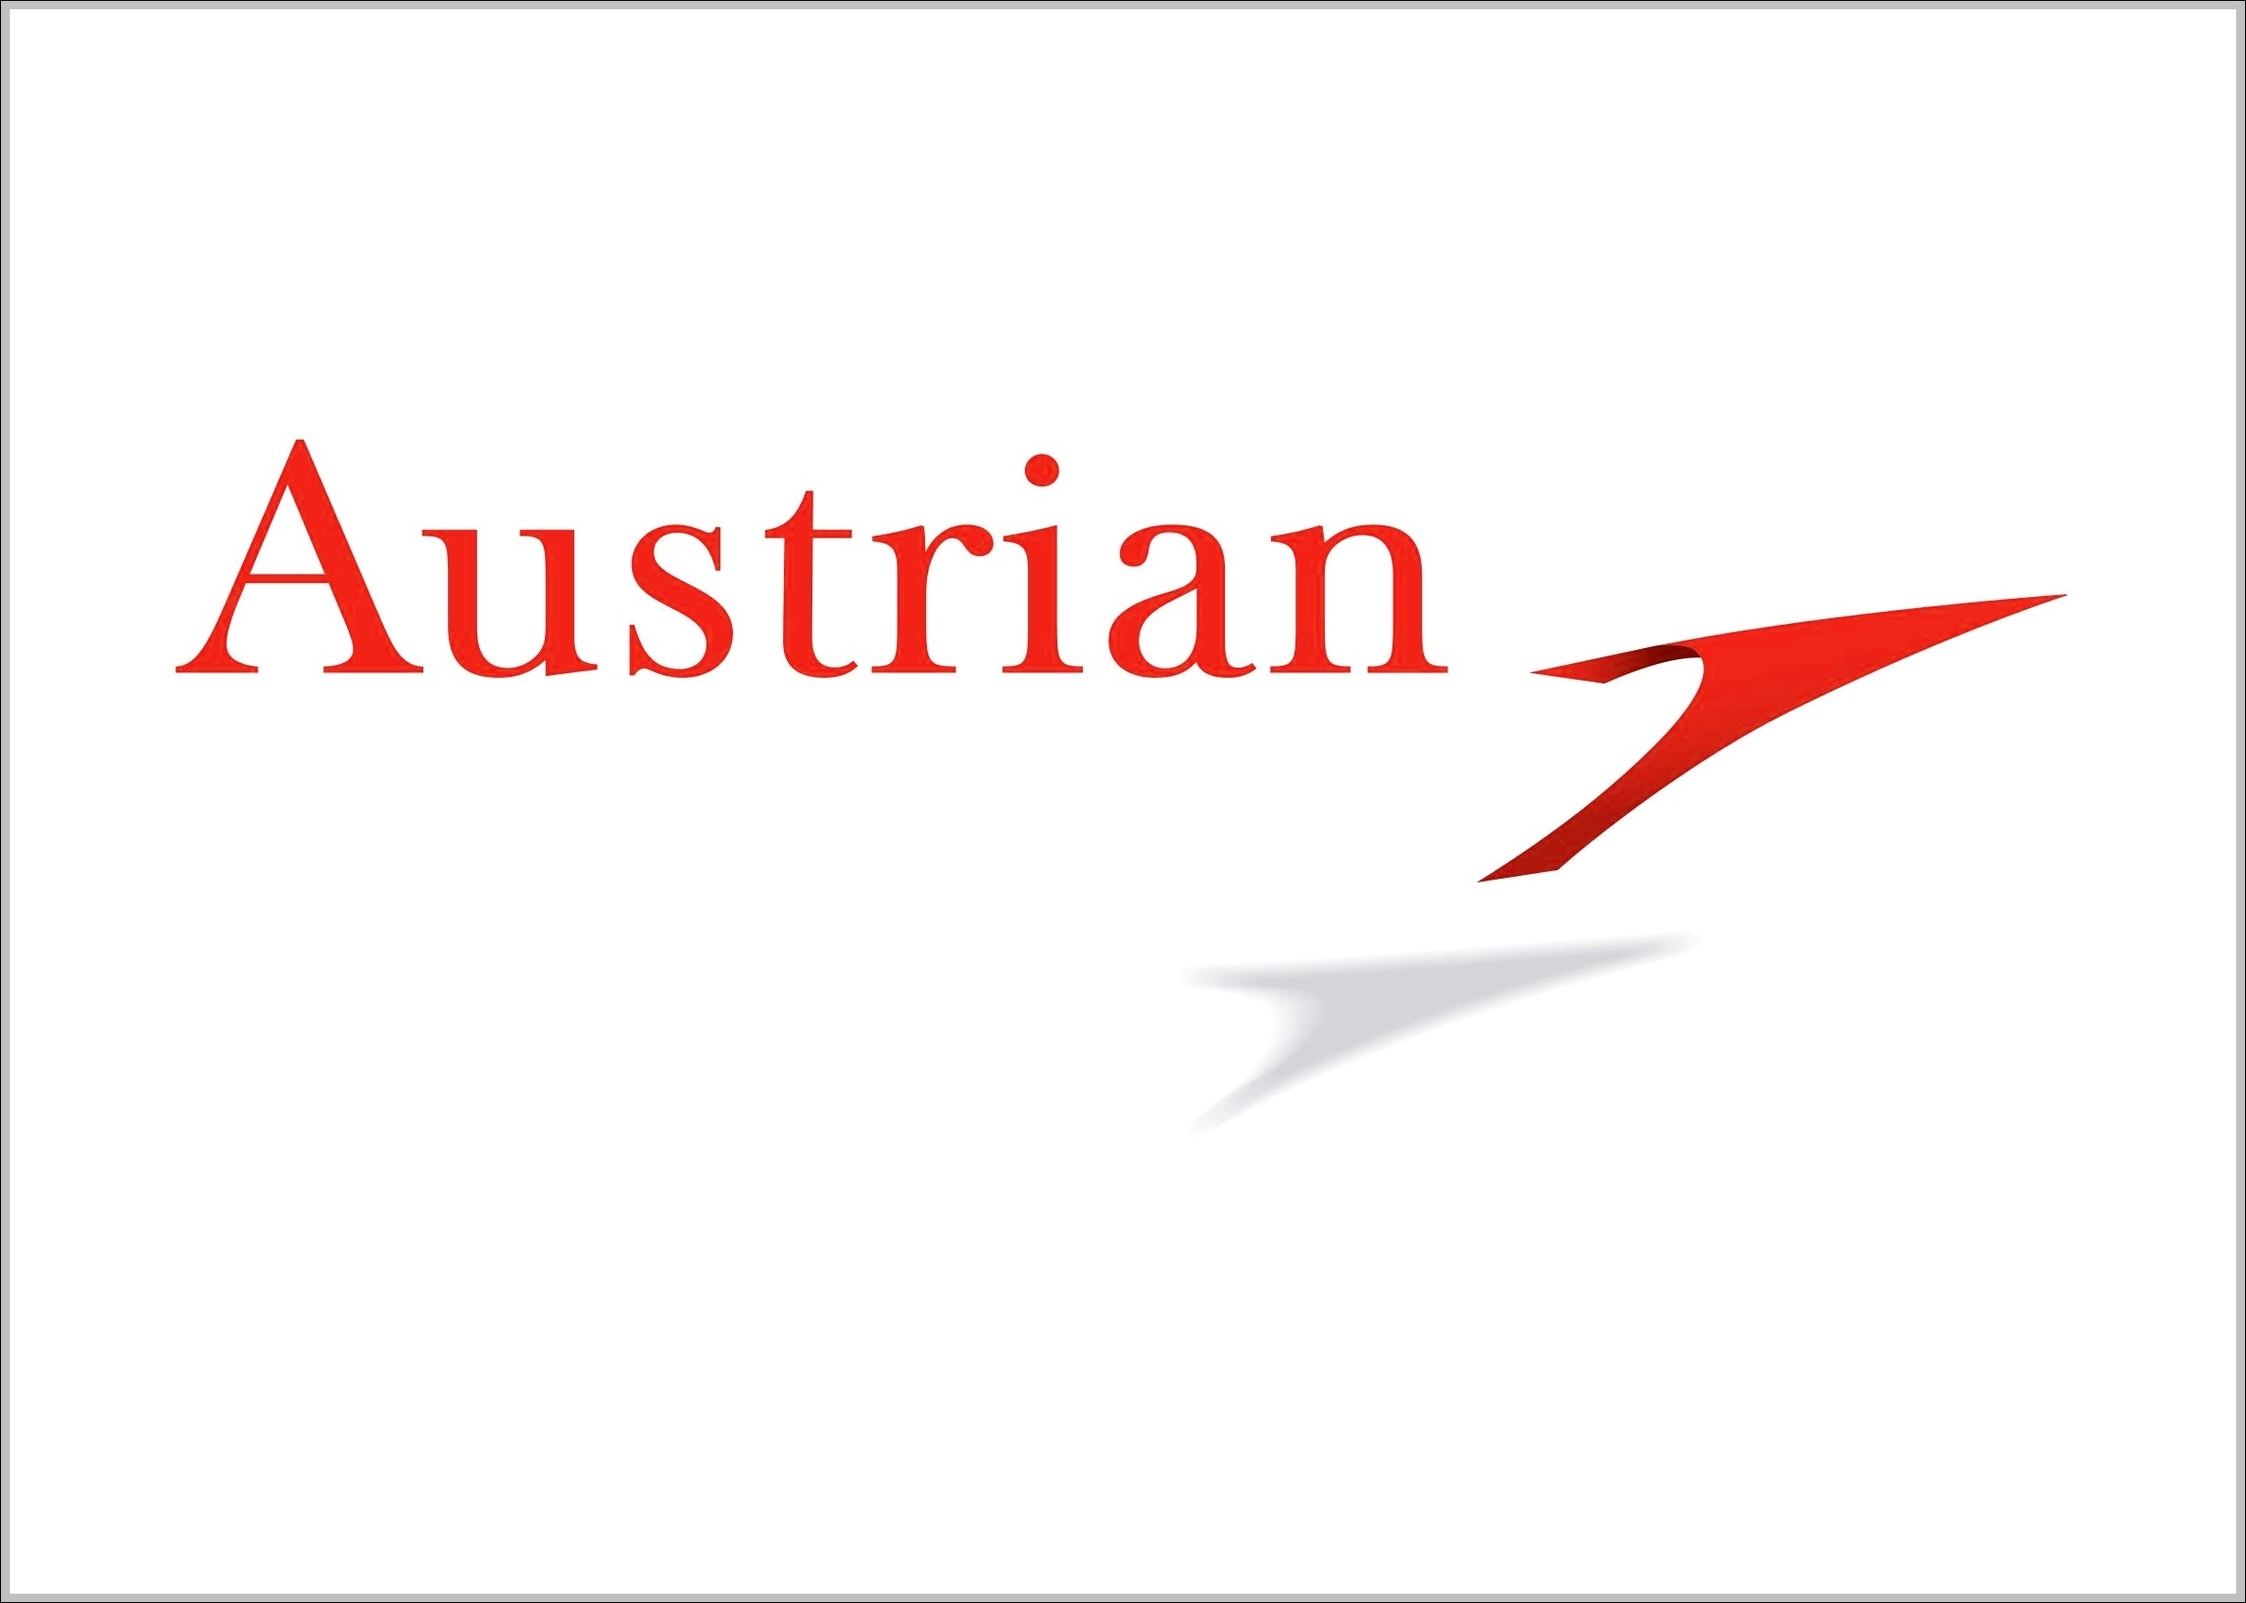 Austrian Airlines logo old